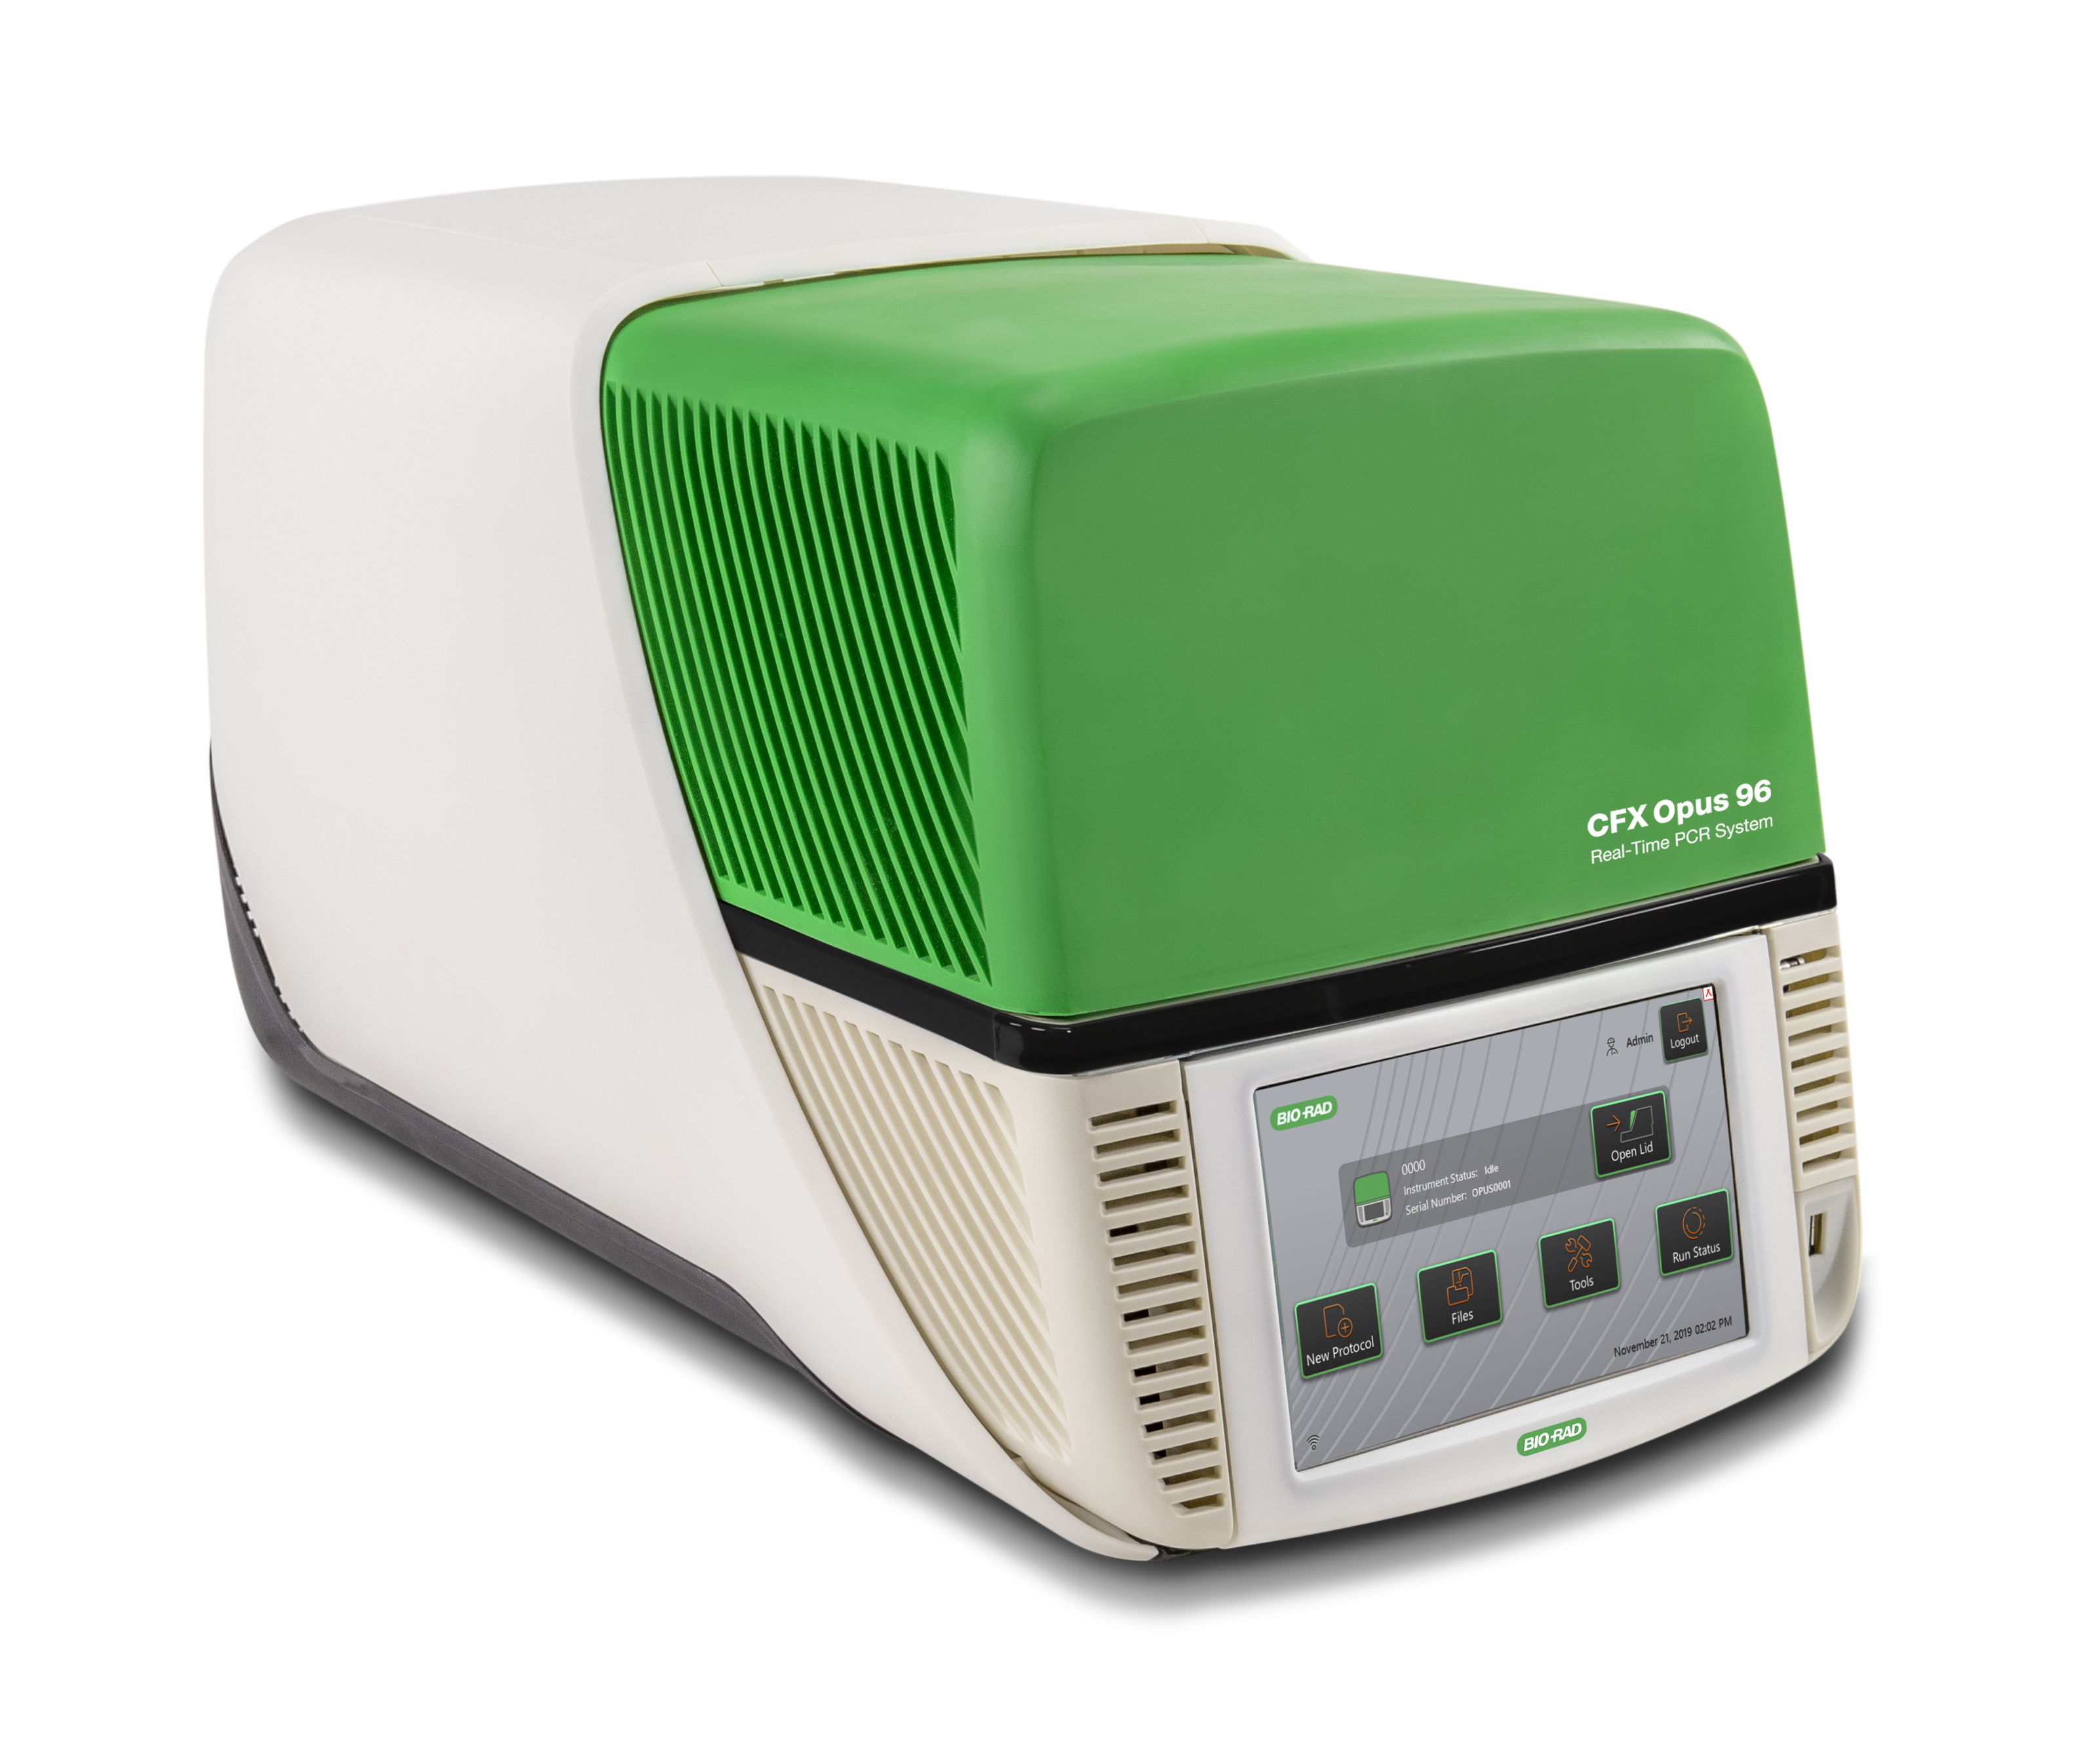 The CFX Opus 96 Real-Time PCR System